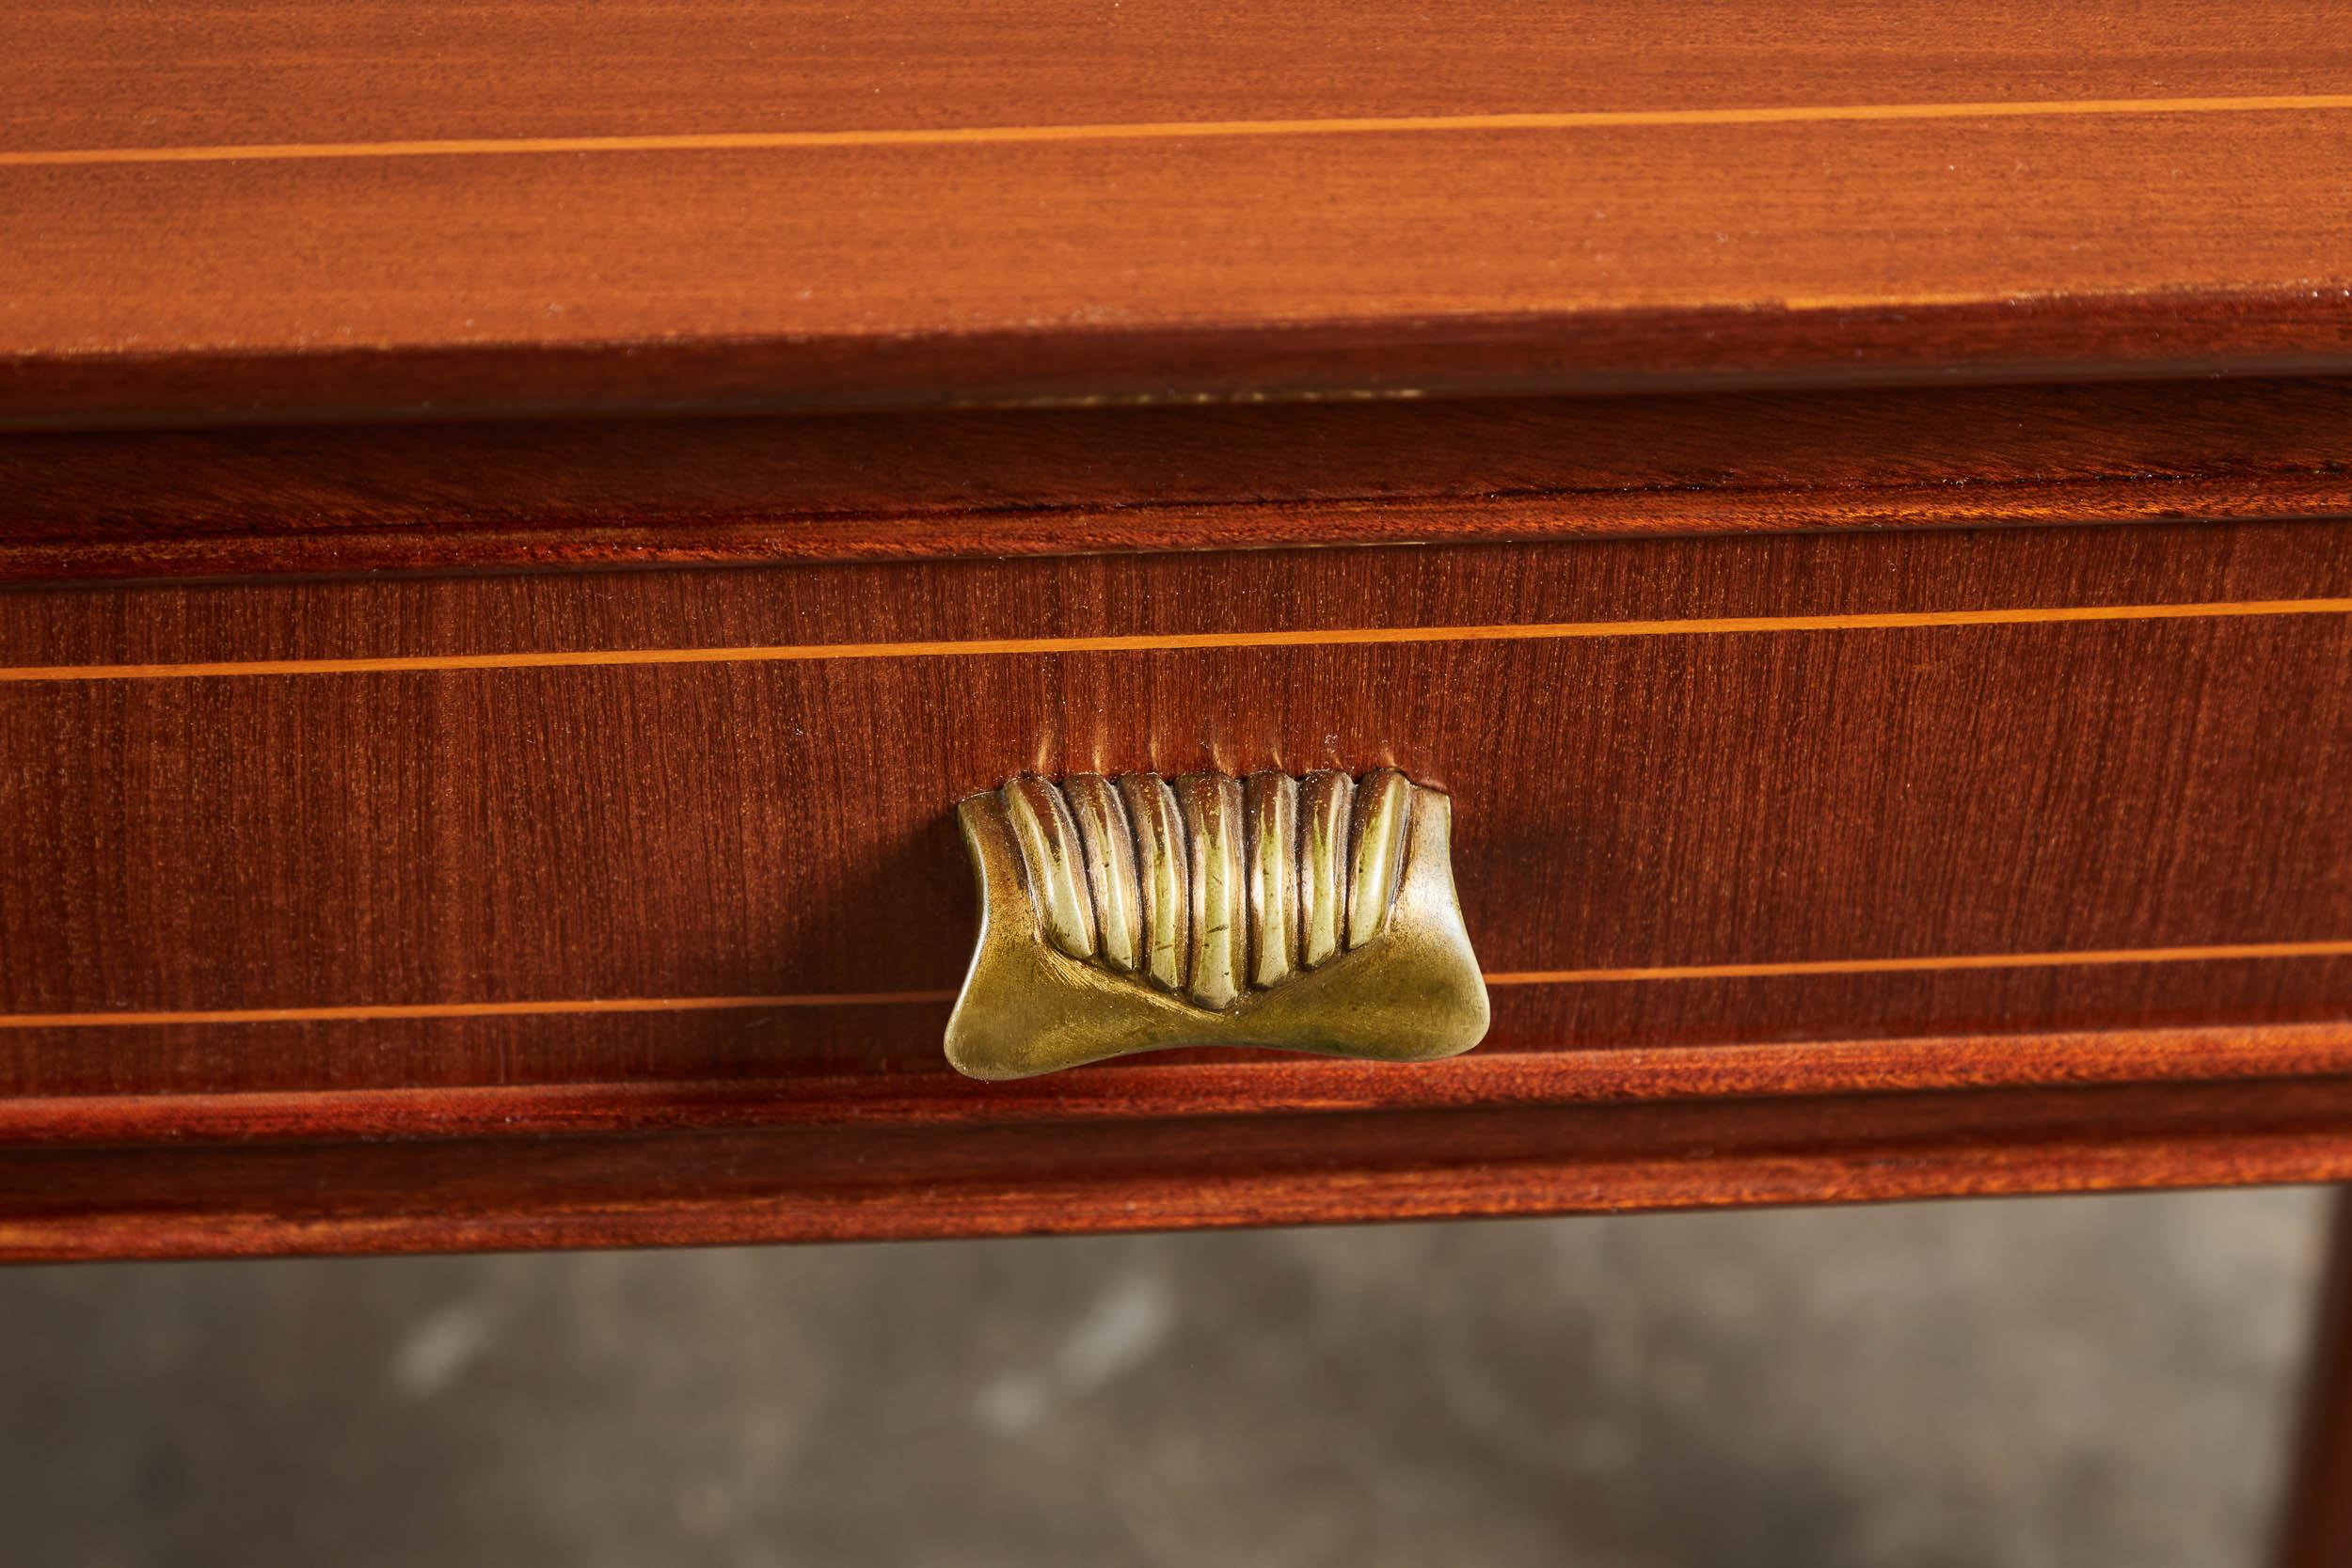 A 1940s Italian console with three drawers in Paolo Buffa style. Slim legs and delicate inlays make this piece both elegant and understated. Gold-toned hardware and gently curved front. Minor blemish on top, minimized greatly with new restoration.